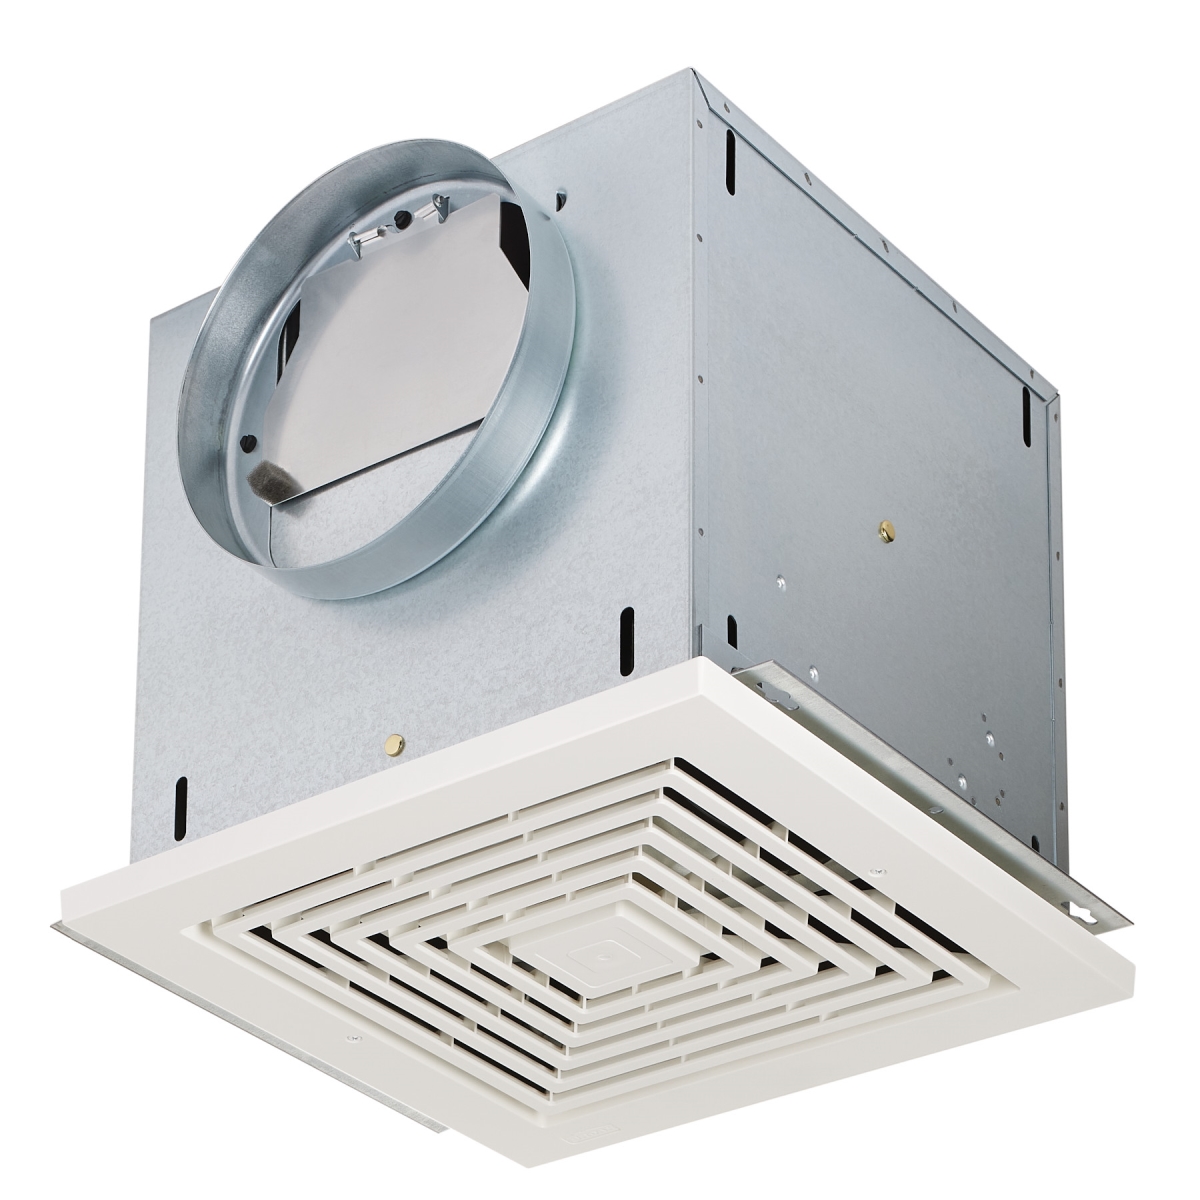 Picture of Broan Nutone L200E 200 CFM Losone-E Select Ventilation Fan with Energy Star